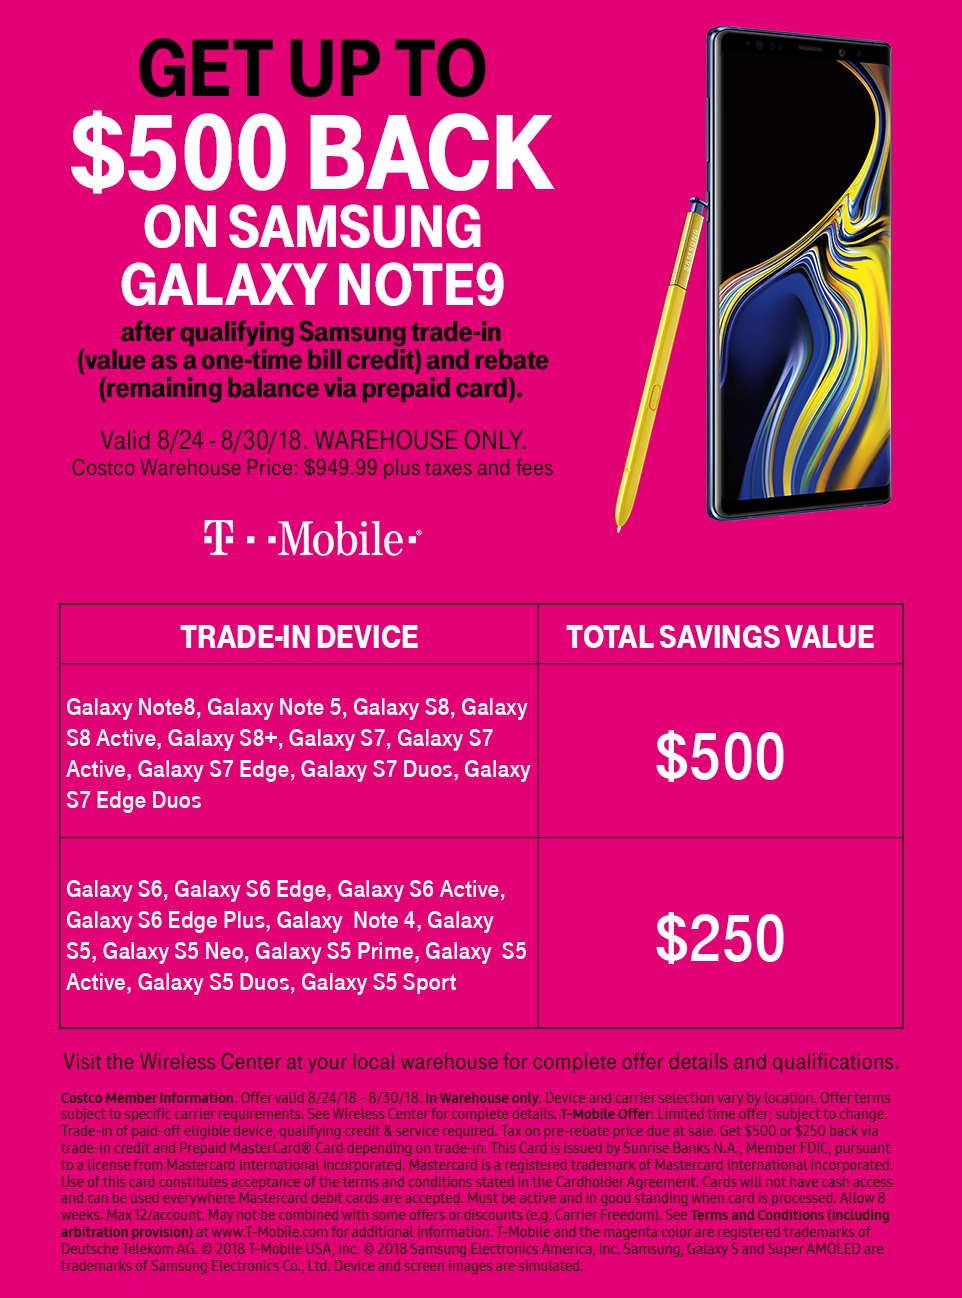 Get up to $500 in one lump sum when you buy the Samsung Galaxy Note 9 at Costco with a specified trade-in - Buy the T-Mobile Samsung Galaxy Note 9 from Costco and get up to $500 back with trade